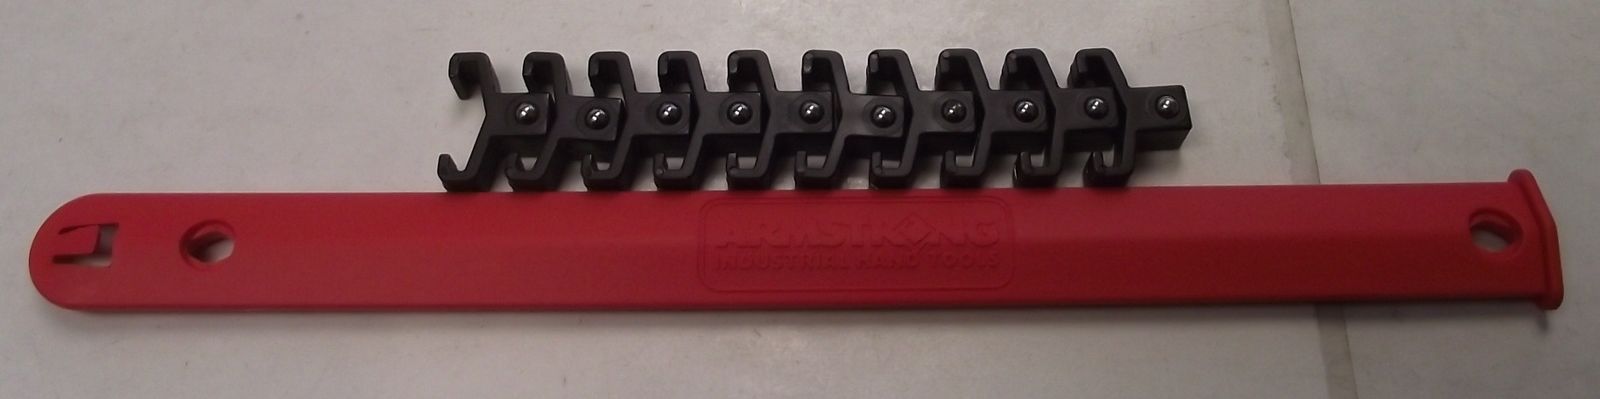 Armstrong 16-836 3/8" Drive Socket Rail Red 10" 10 Positions USA